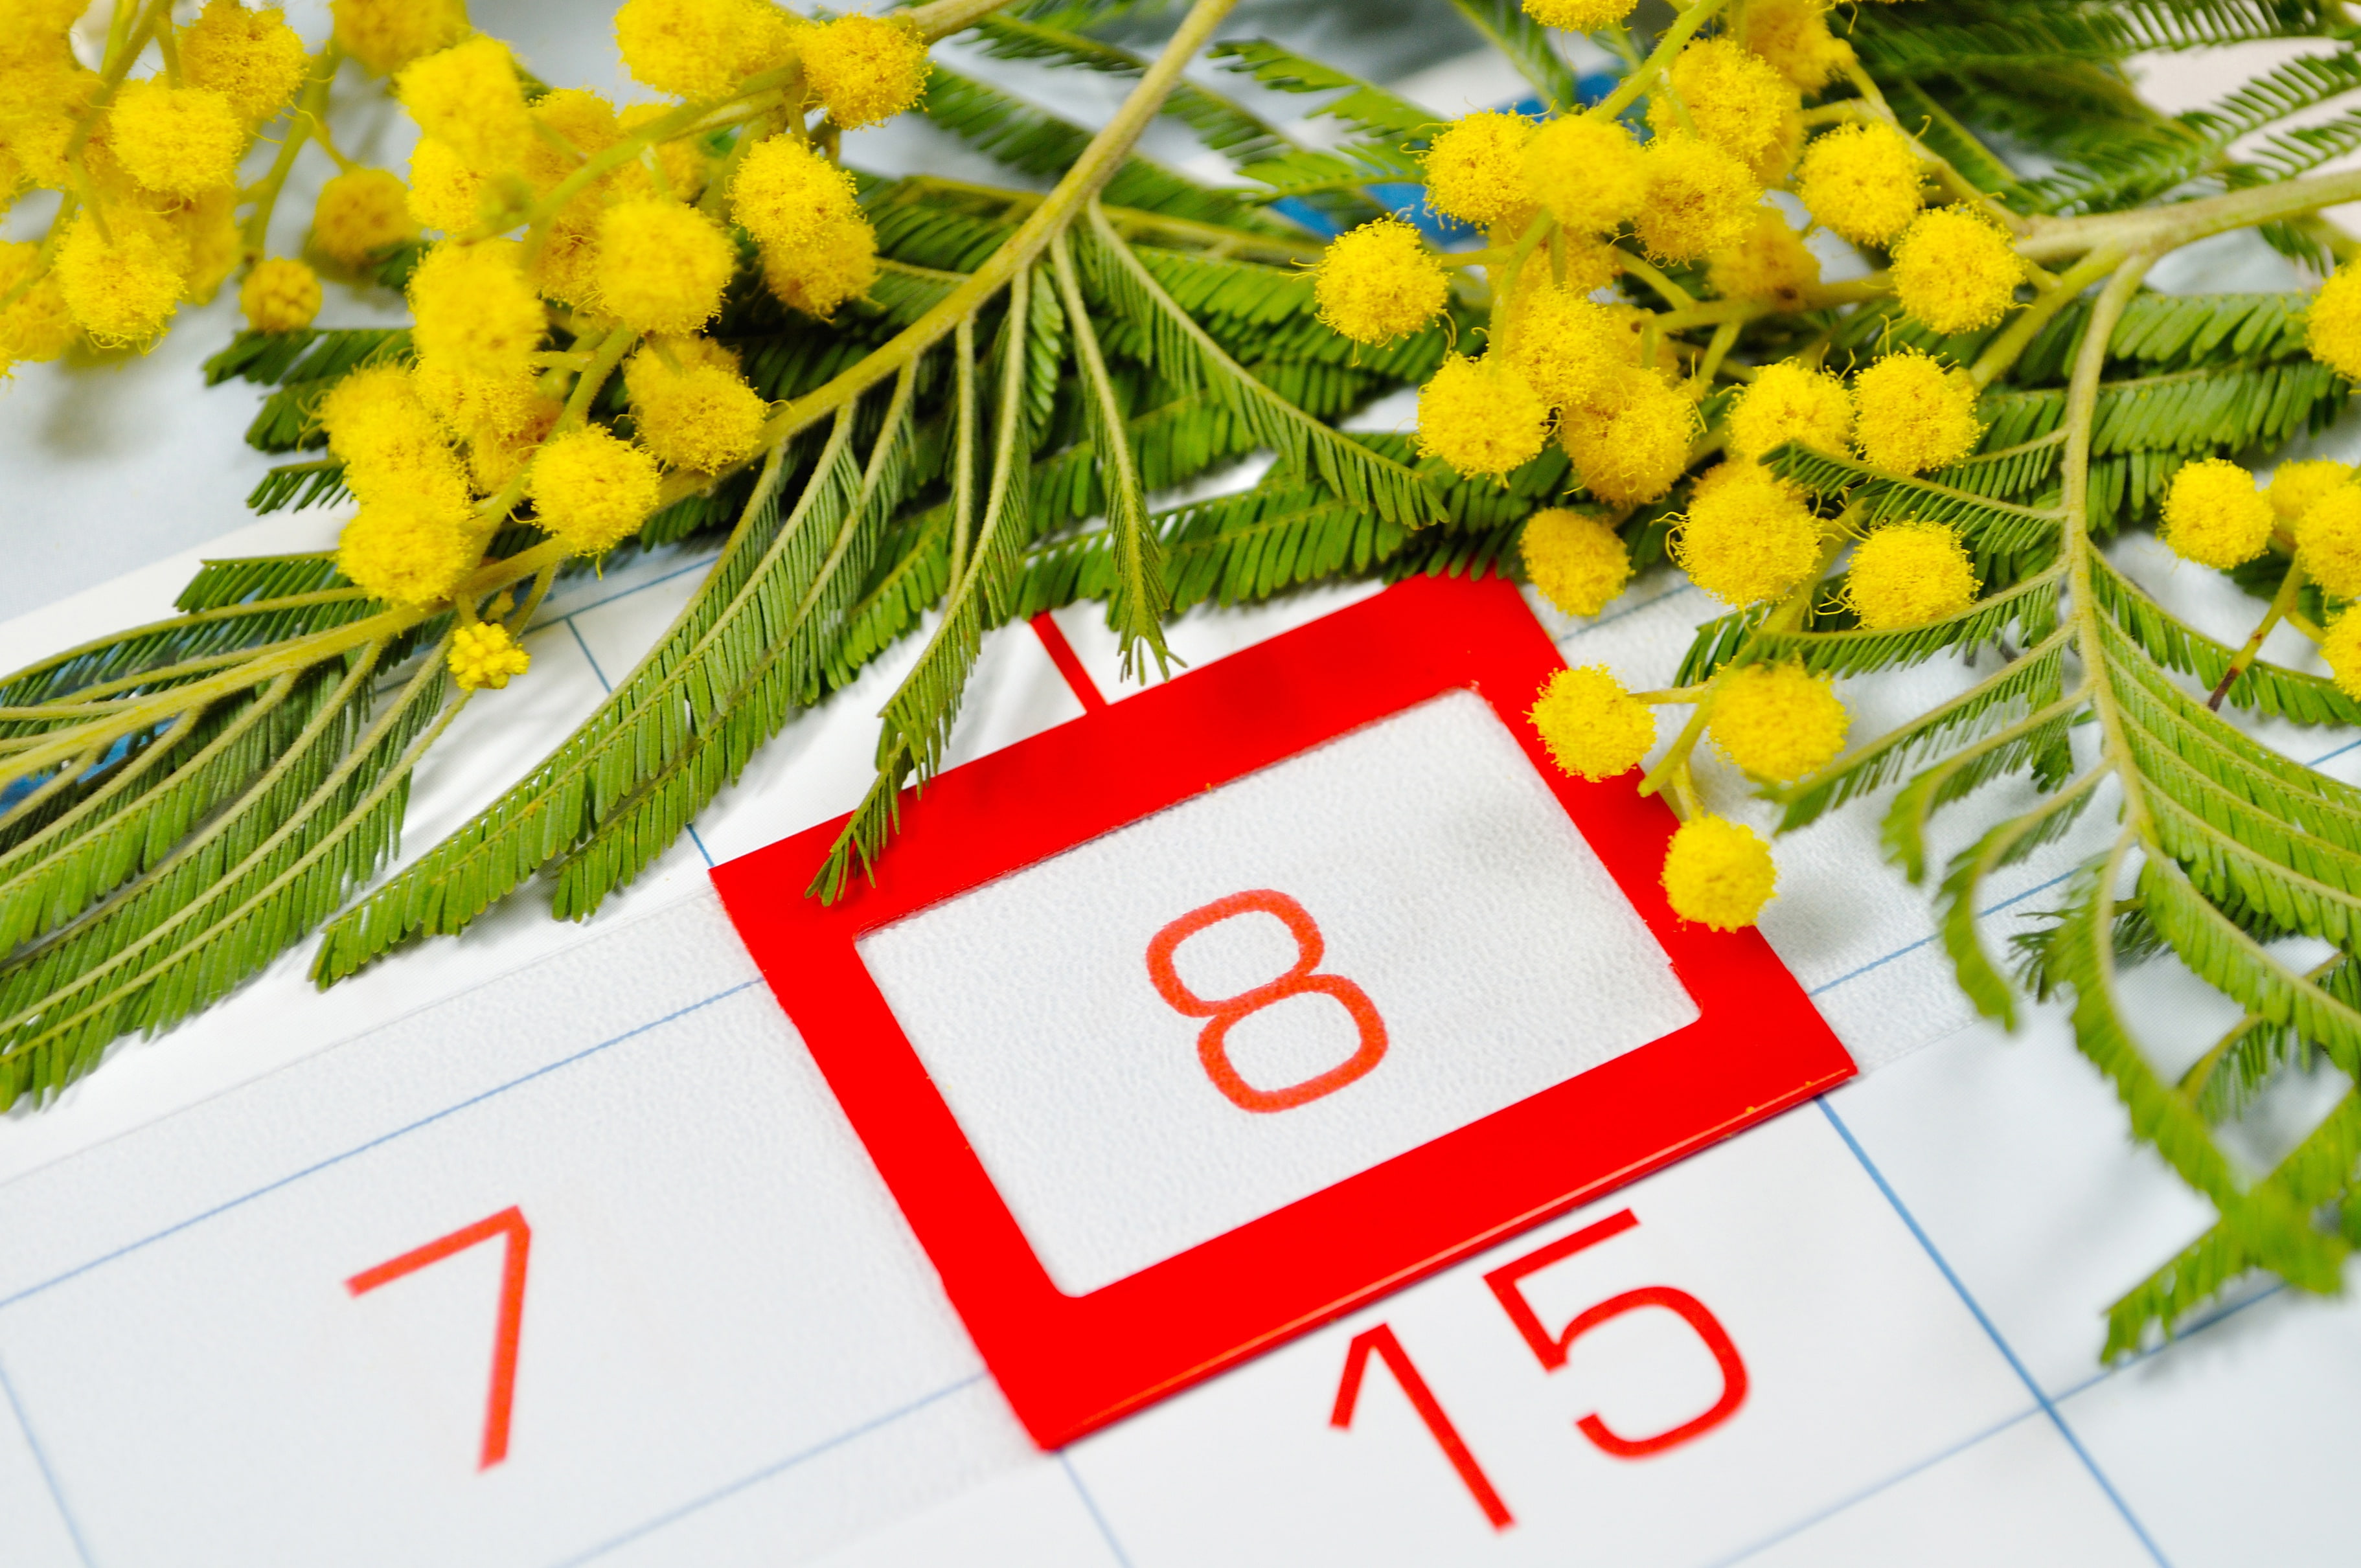 yellow, red, calendar, March 8, flowers, number, date, Mimosa